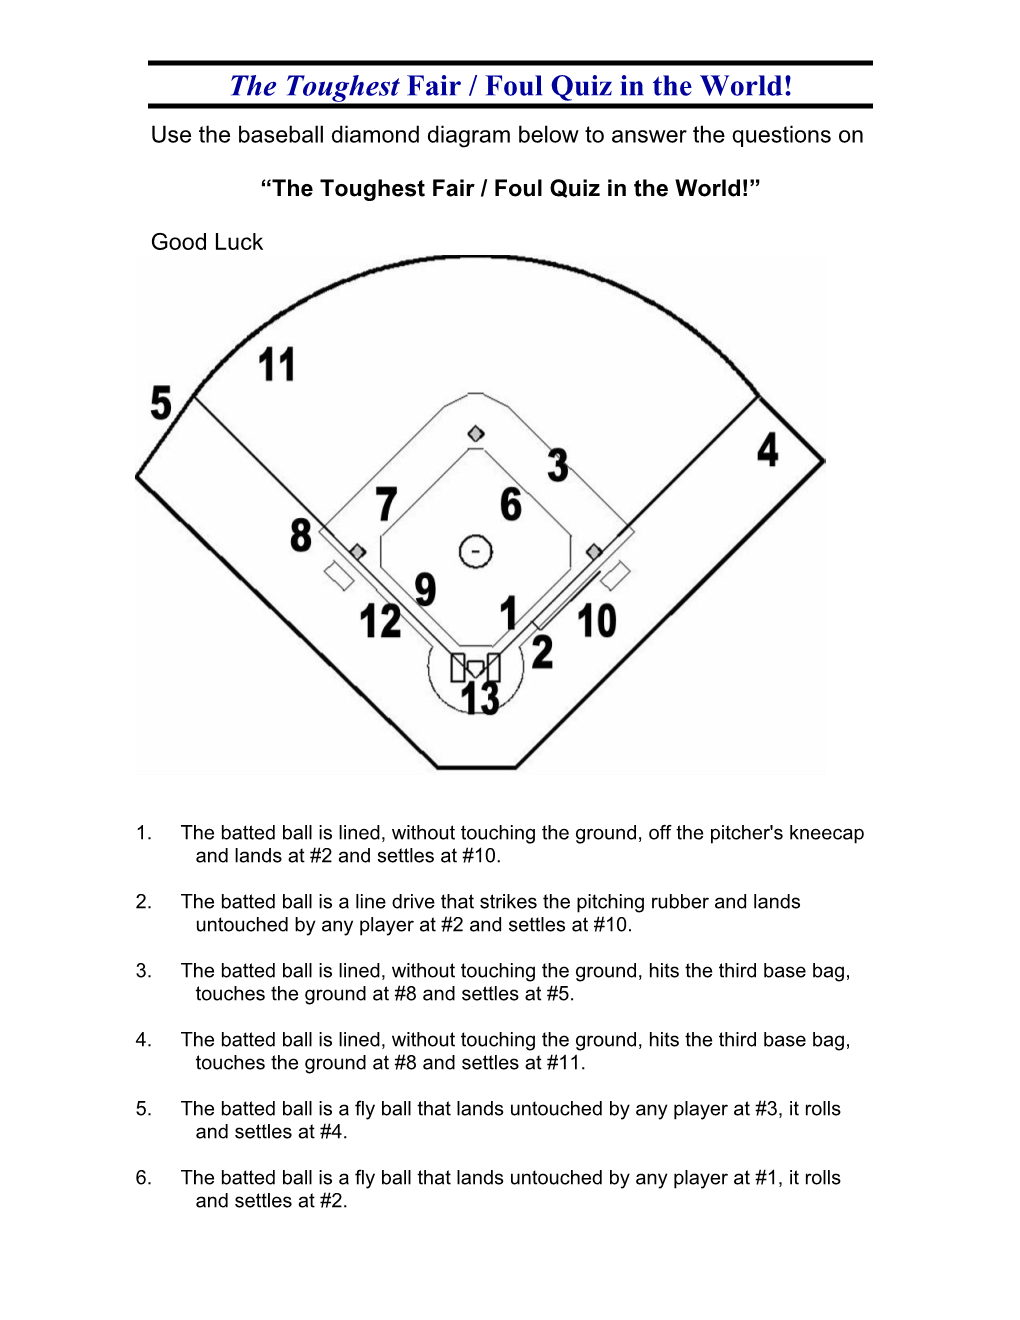 The Toughest Fair / Foul Quiz in the World! Use the Baseball Diamond Diagram Below to Answer the Questions On